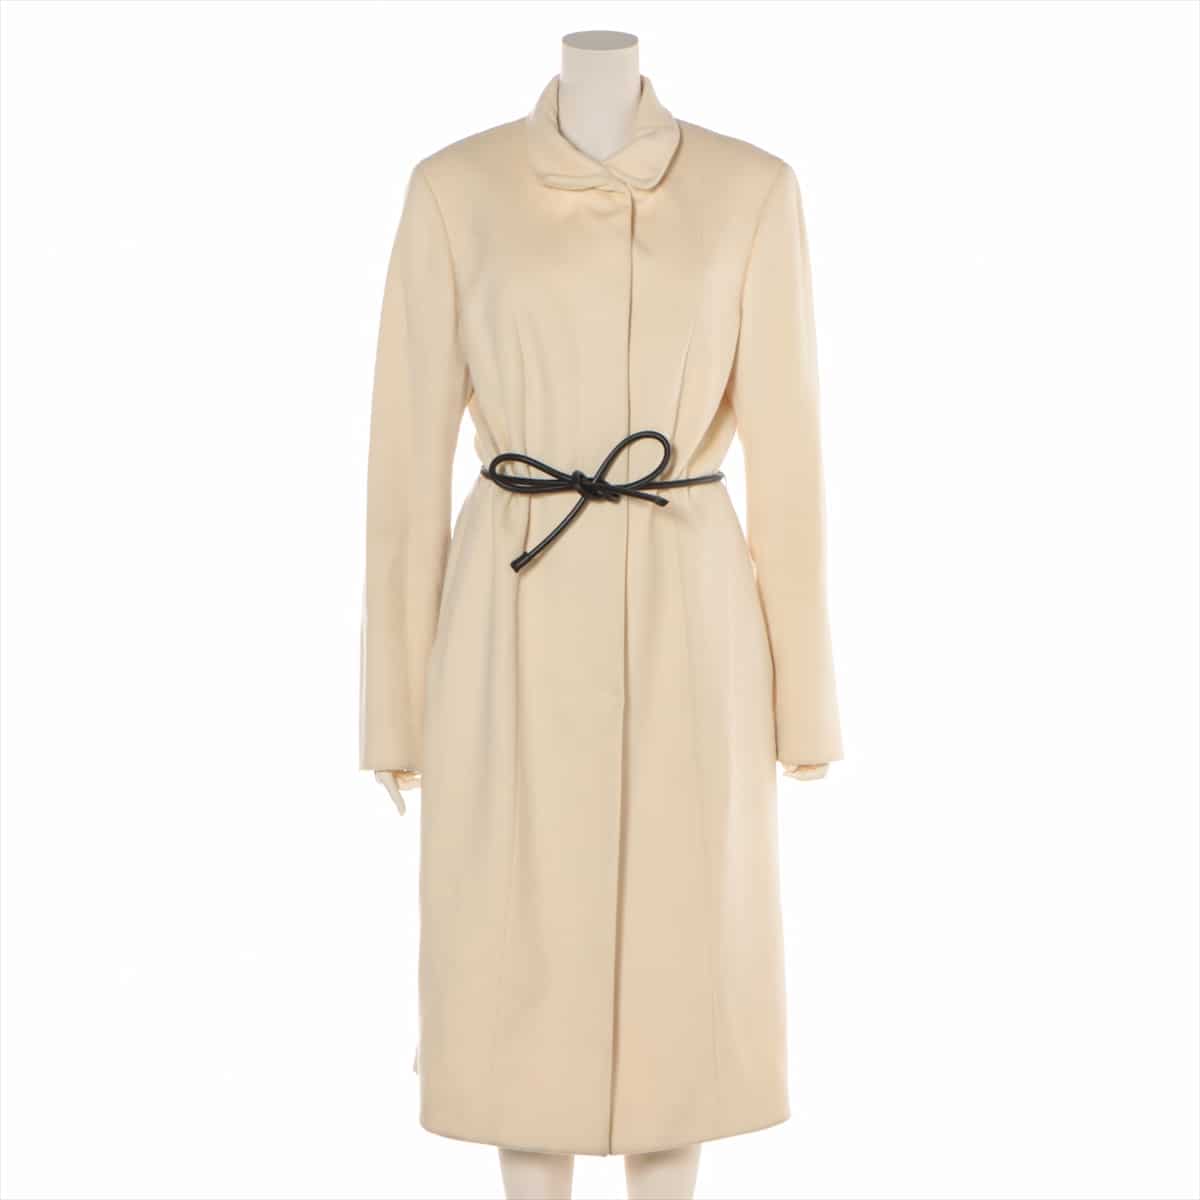 Gucci Wool & Cashmere coats 44 Ladies' White  There are spots on the armpits